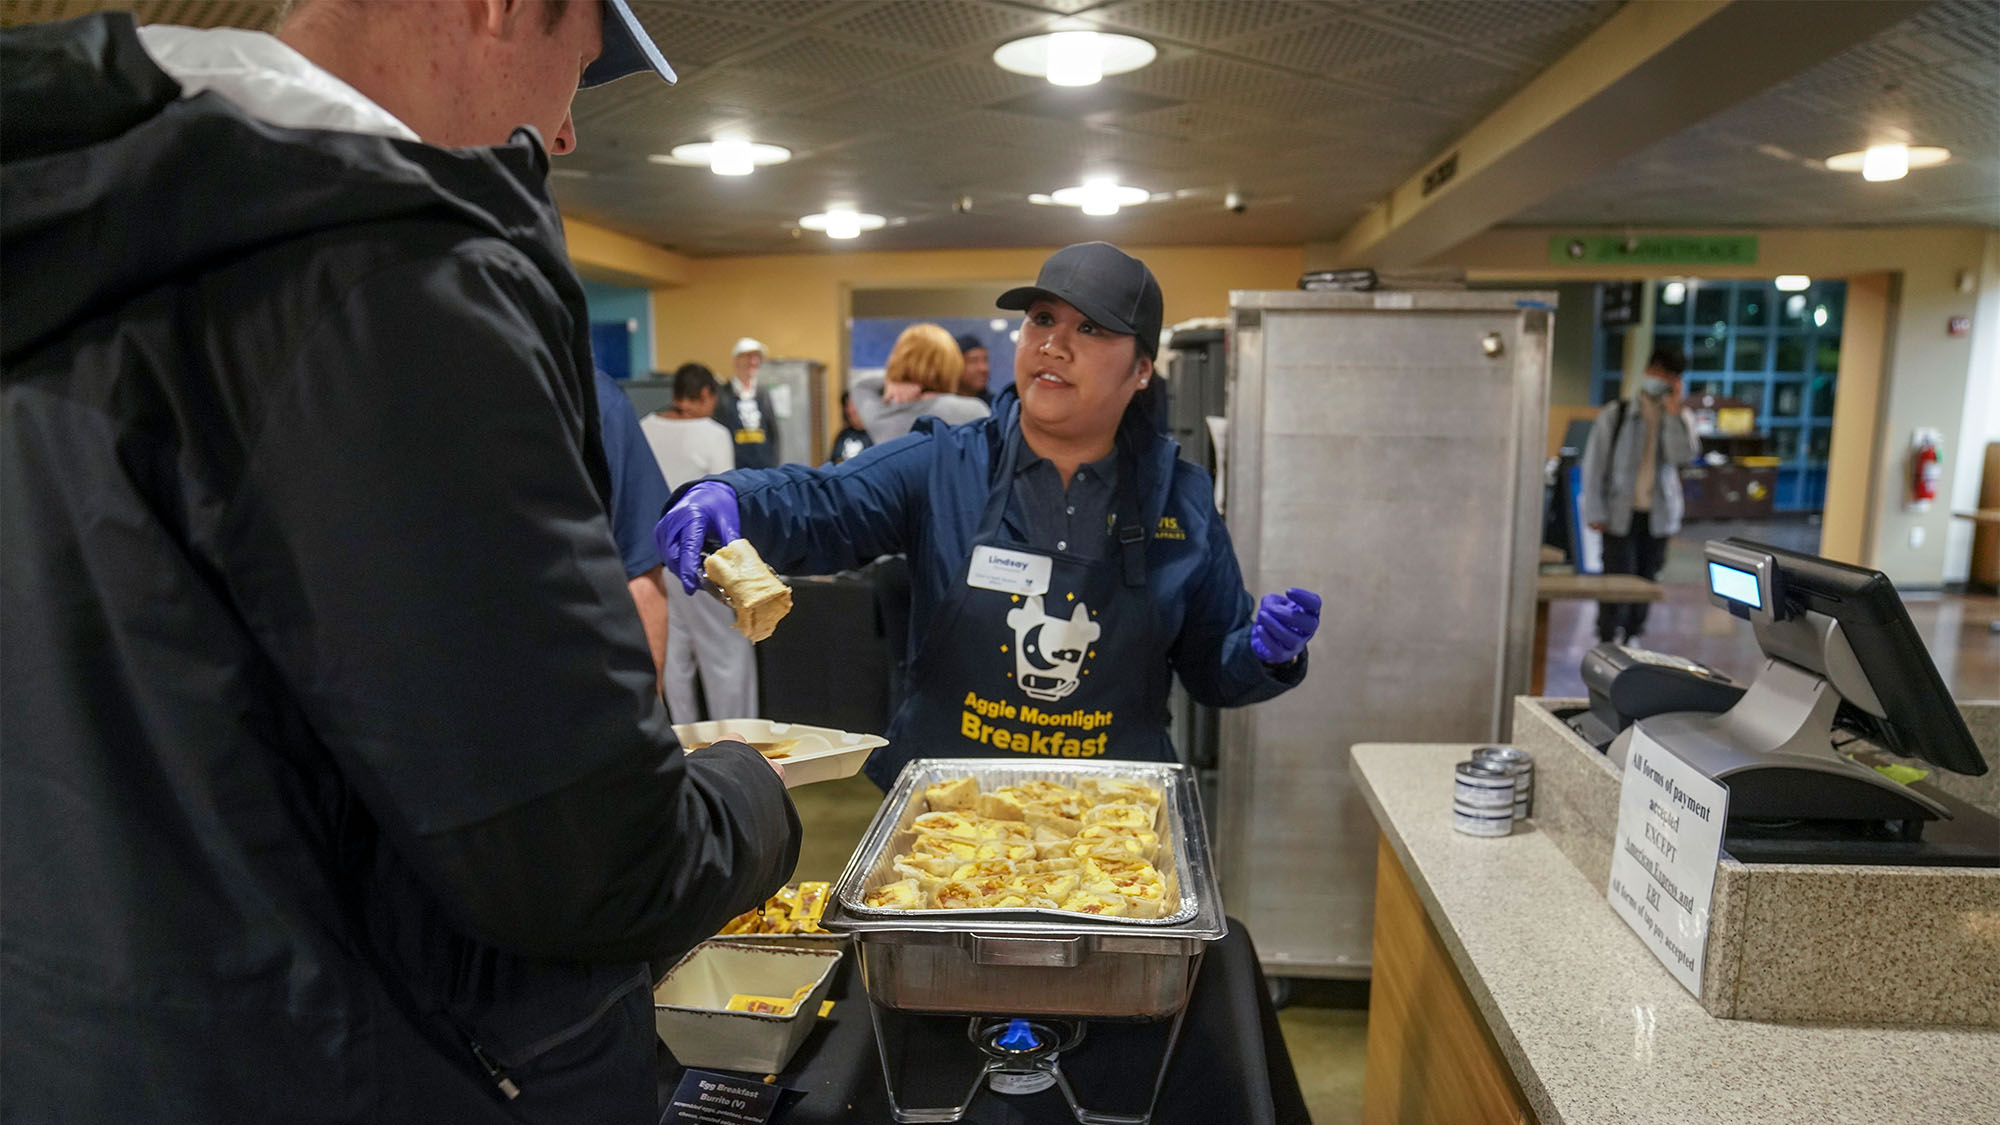 Woman serves breakfast burritos from warming tray